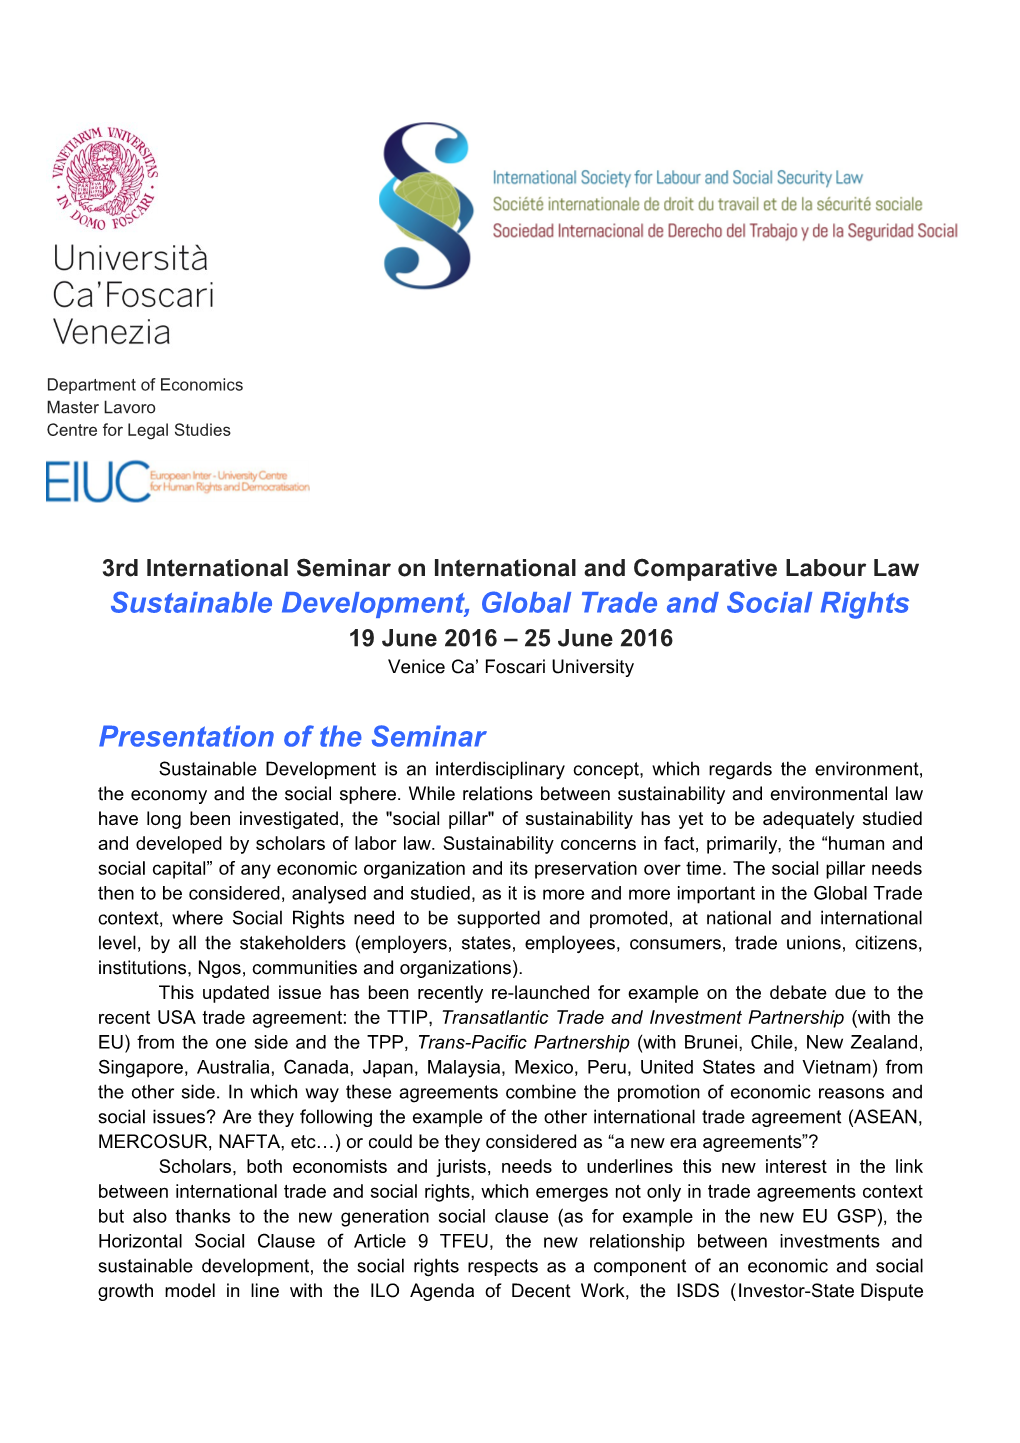 3Rd International Seminar on International and Comparative Labour Law